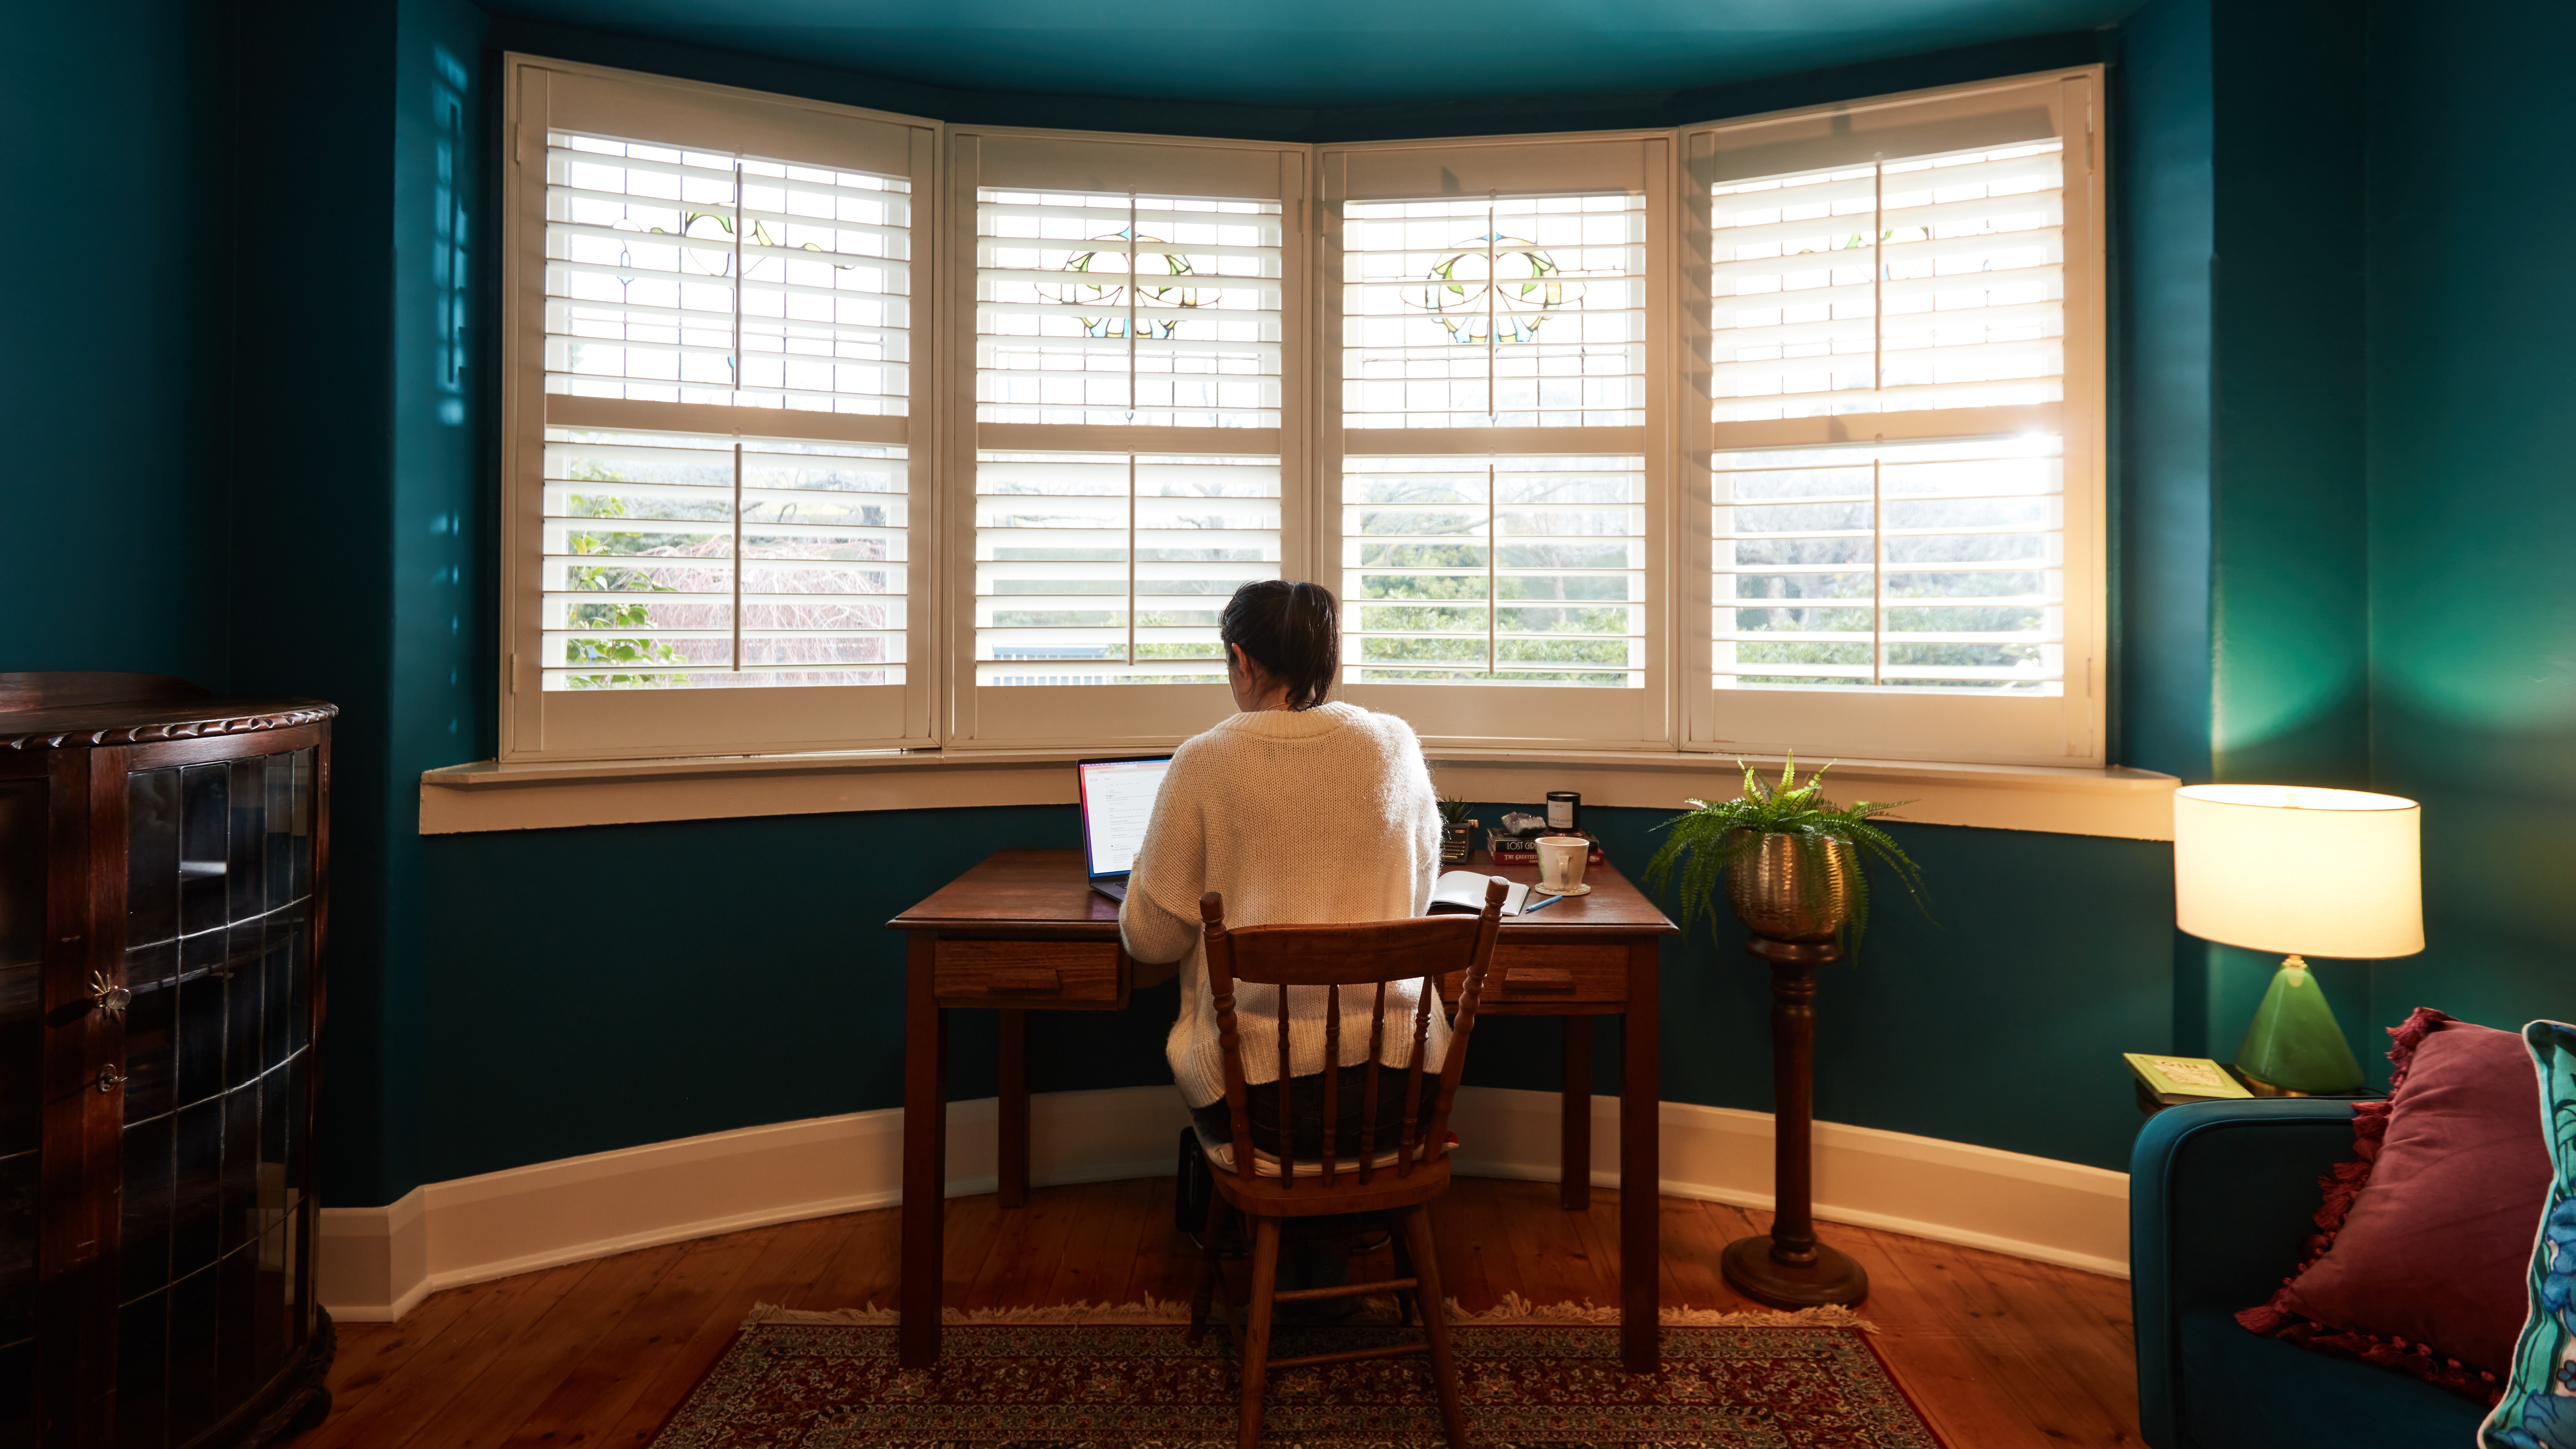 A student studying at an old wooden desk by a bay window. Daylight streams through and casts onto turquoise-painted walls..